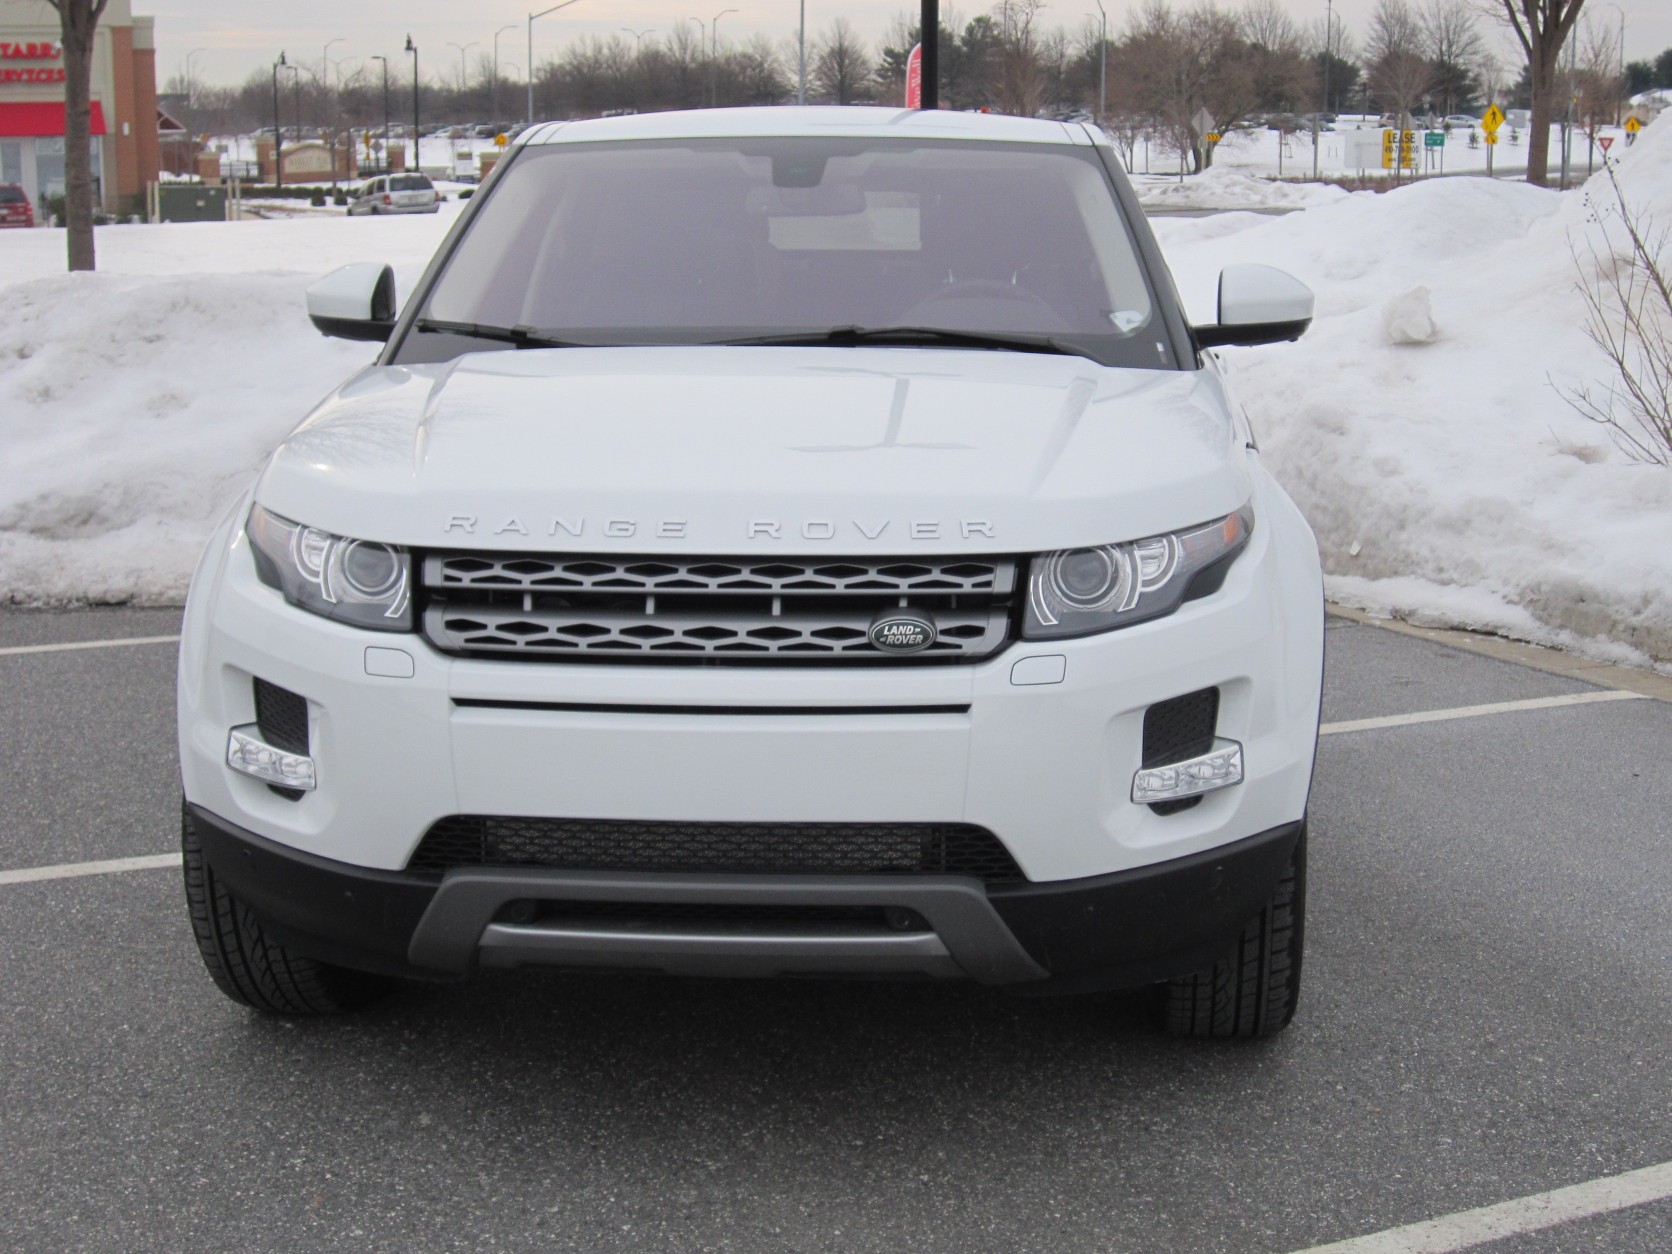 The 2015 Range Rover Evoque might not be the newest small luxury crossover on the market anymore but it’s still one of the most stylish. (WTOP/Mike Parris)